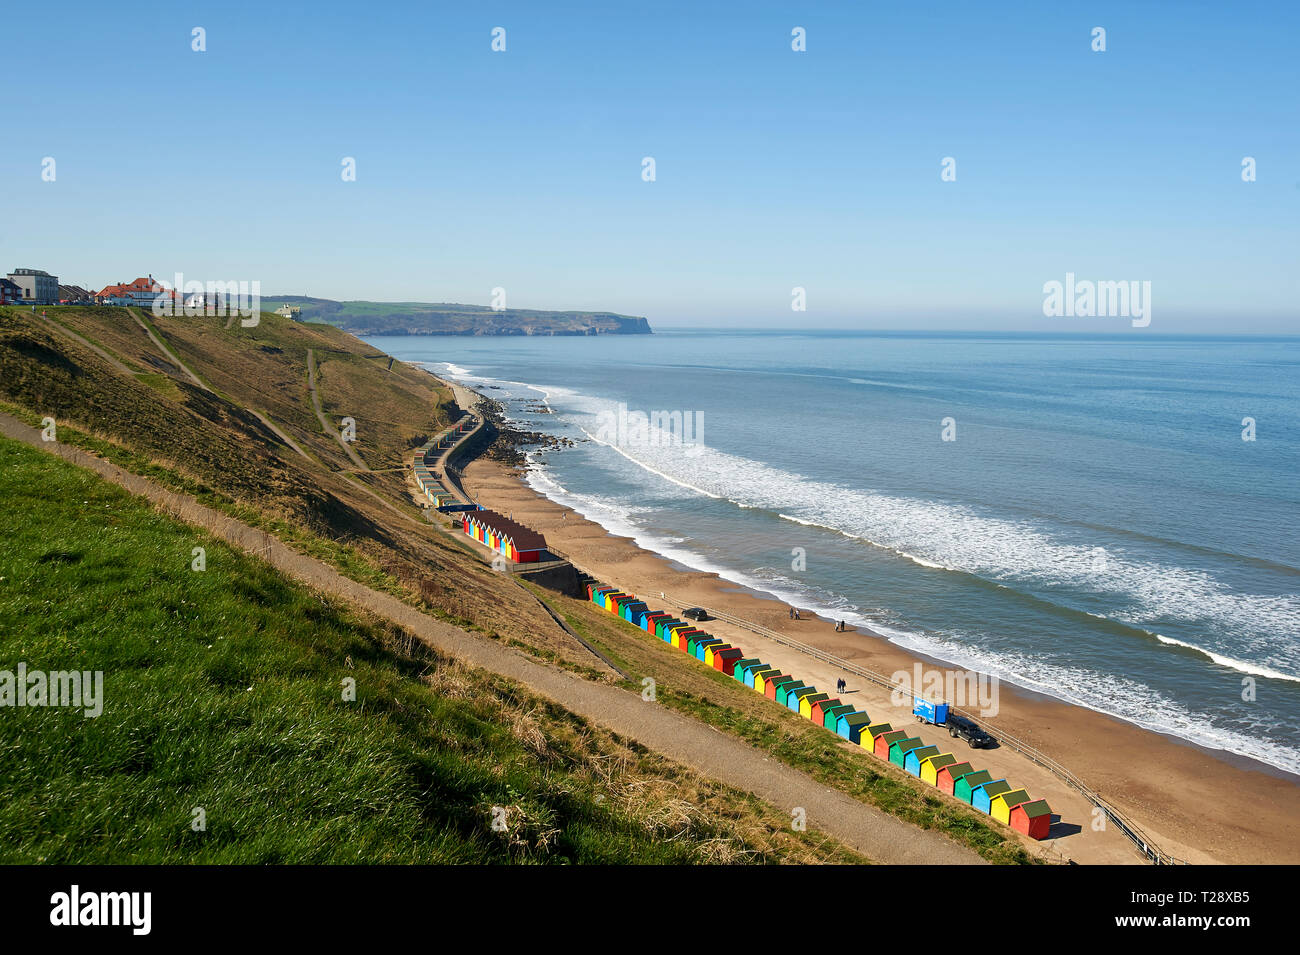 People walking past the Colourful beach huts, west cliff, Whitby, North Yorkshire Coast, England, UK, GB. Stock Photo